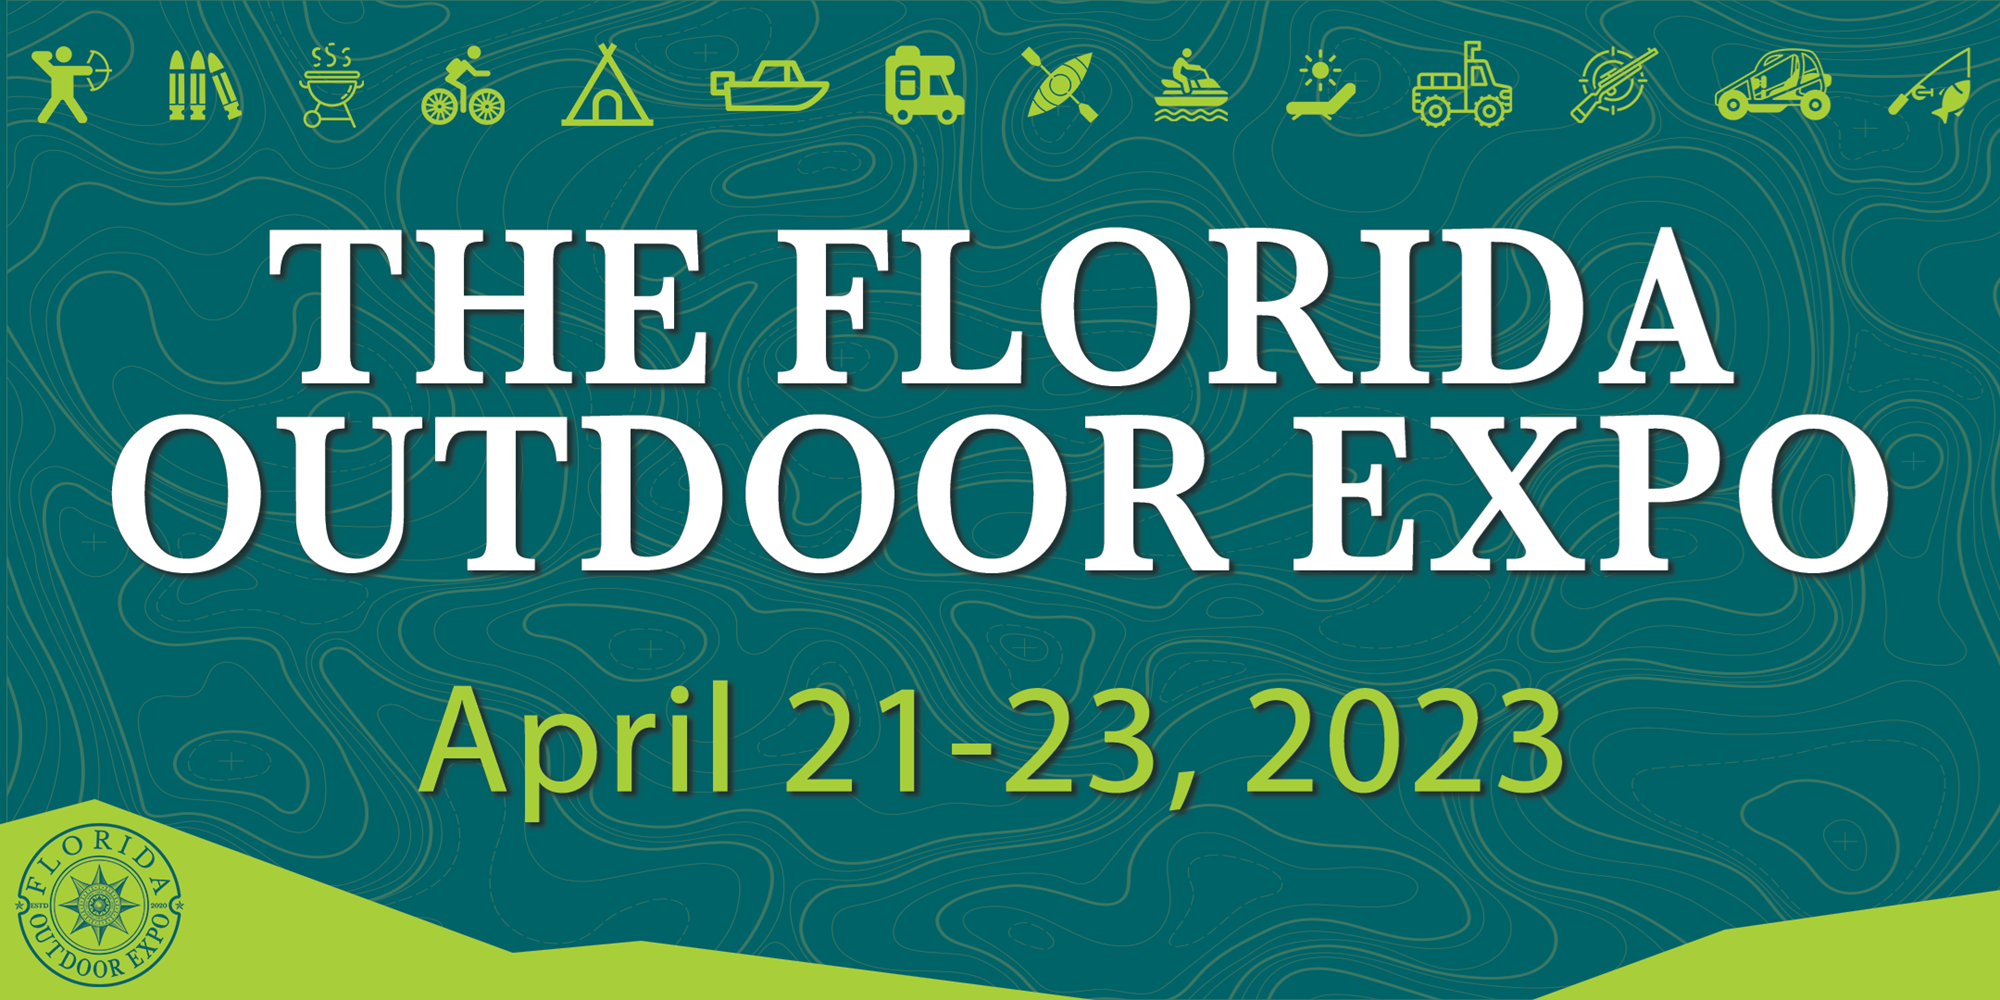 Review of The National Outdoor Expo 2023